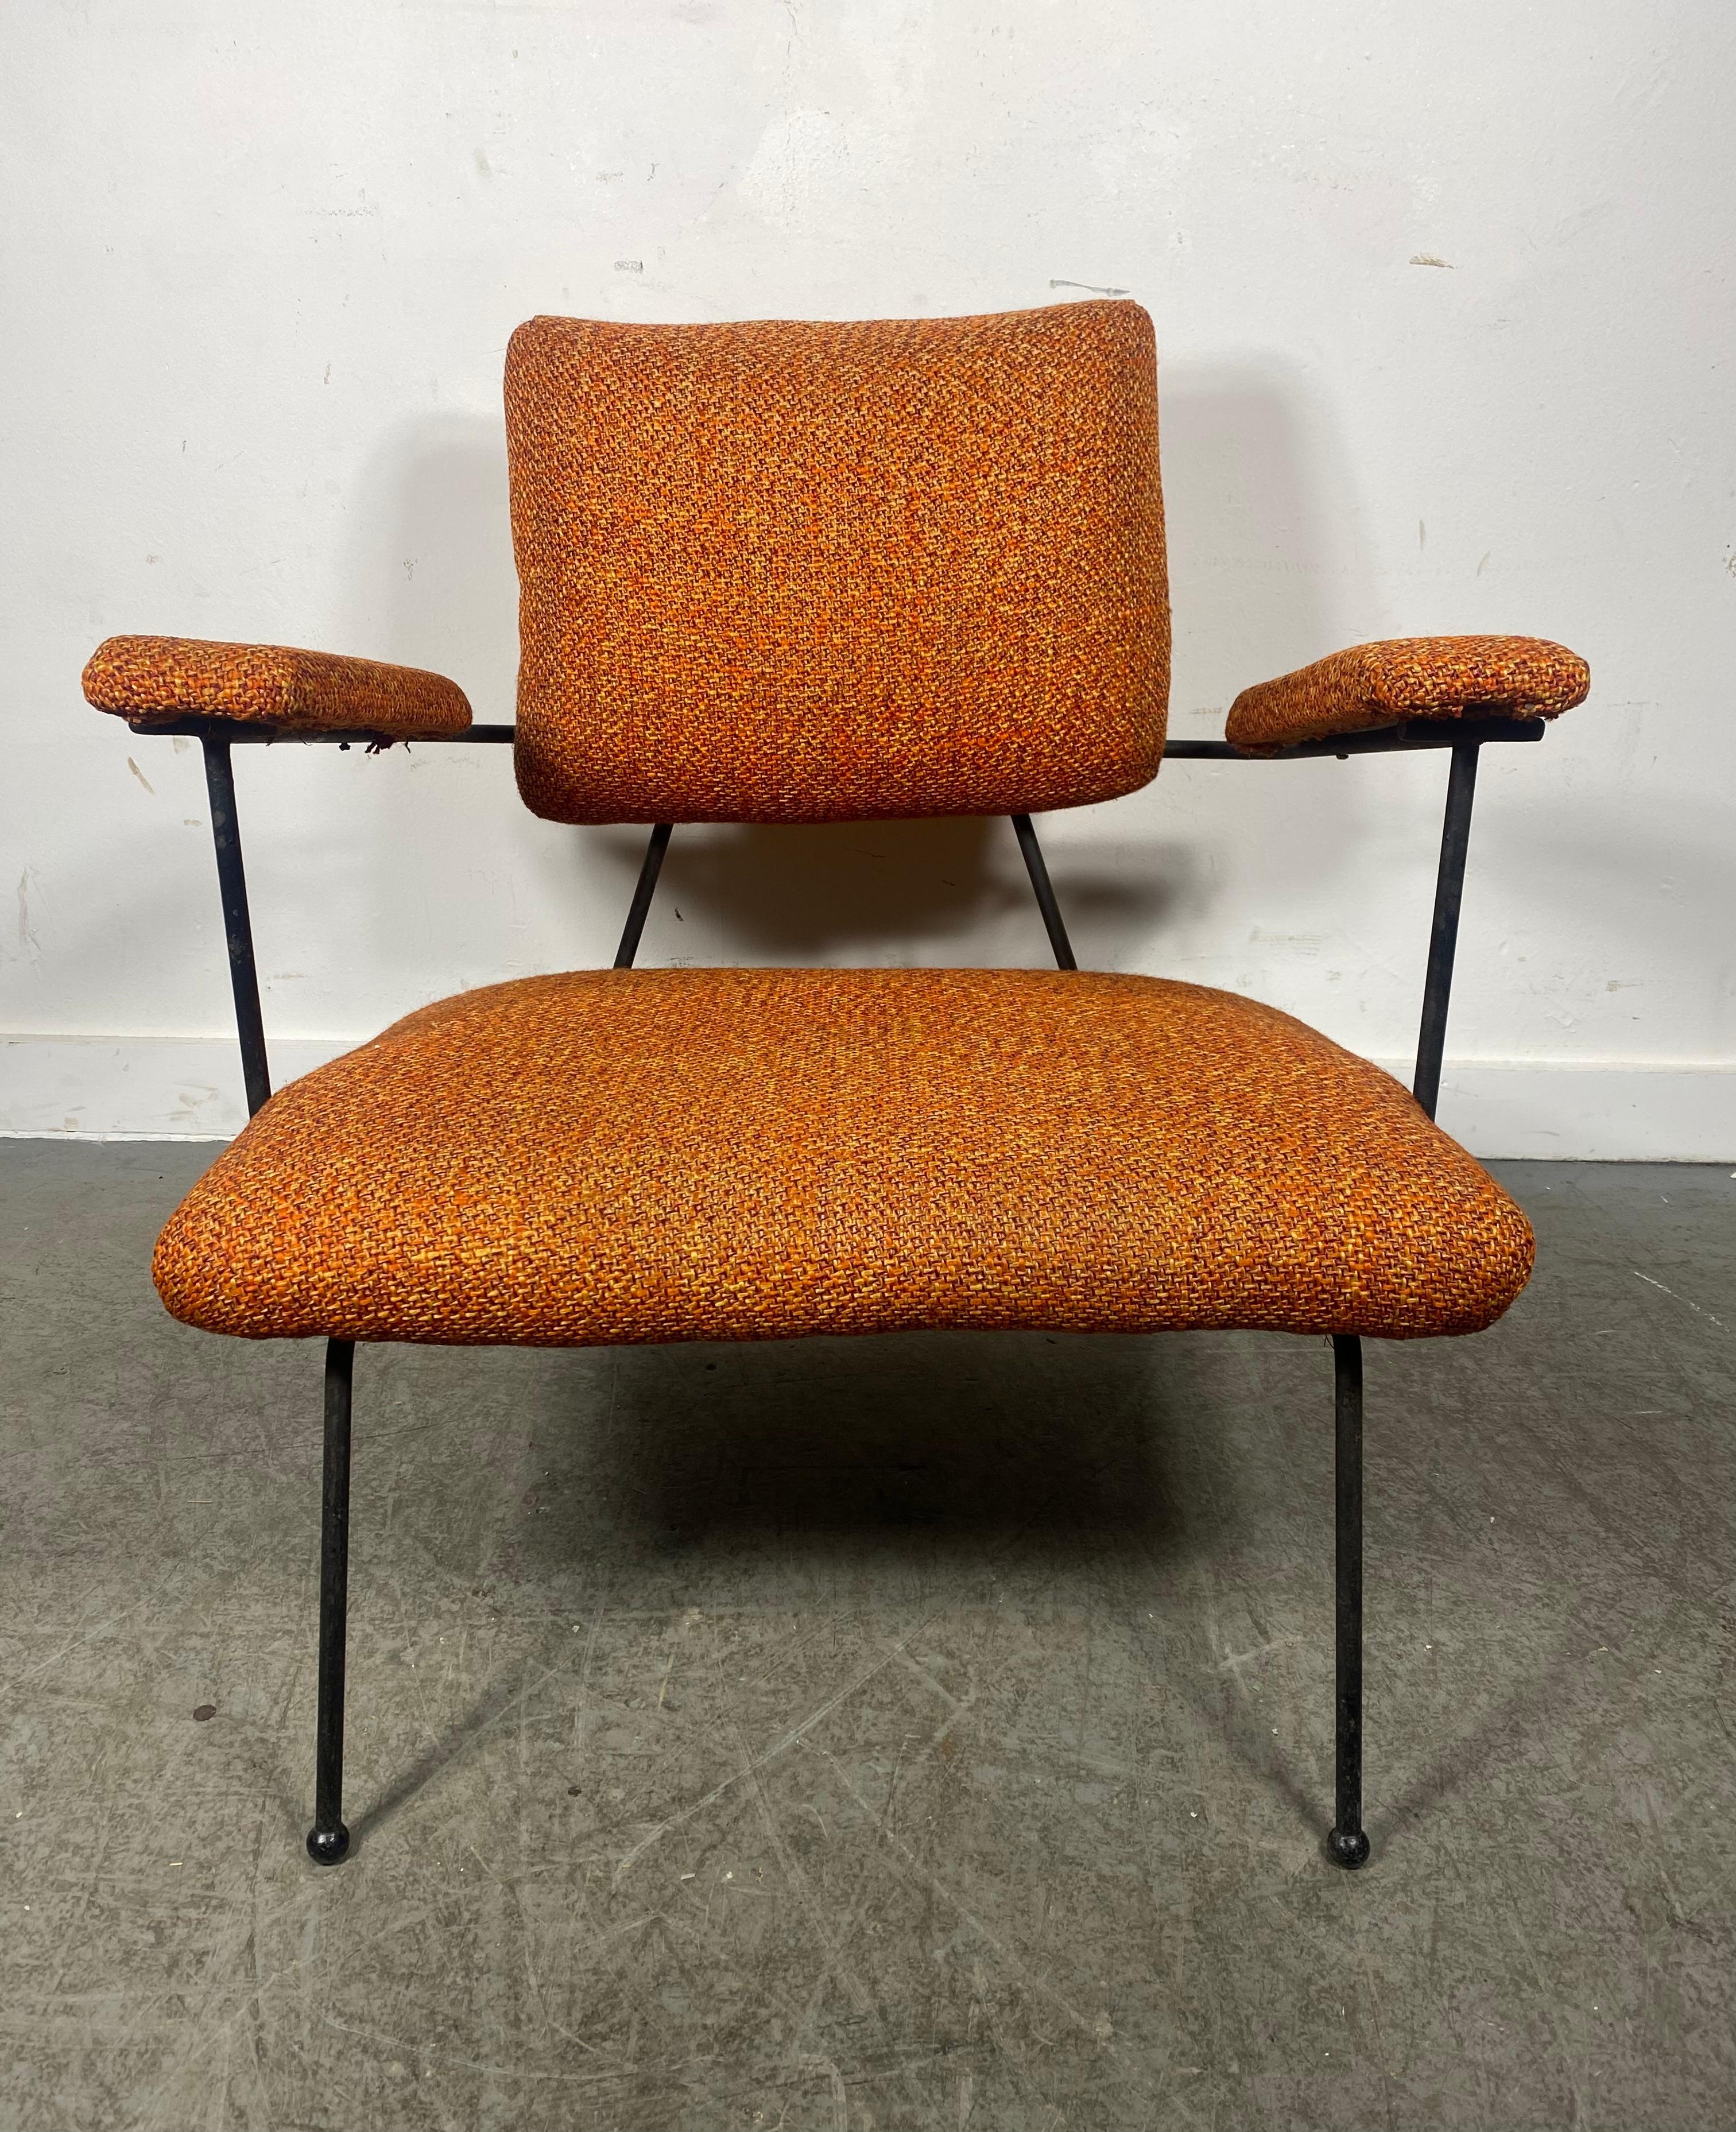 Seldom seen Adrian Pearsall 104-C Iron Lounge Chair  Craft Associates In Good Condition For Sale In Buffalo, NY